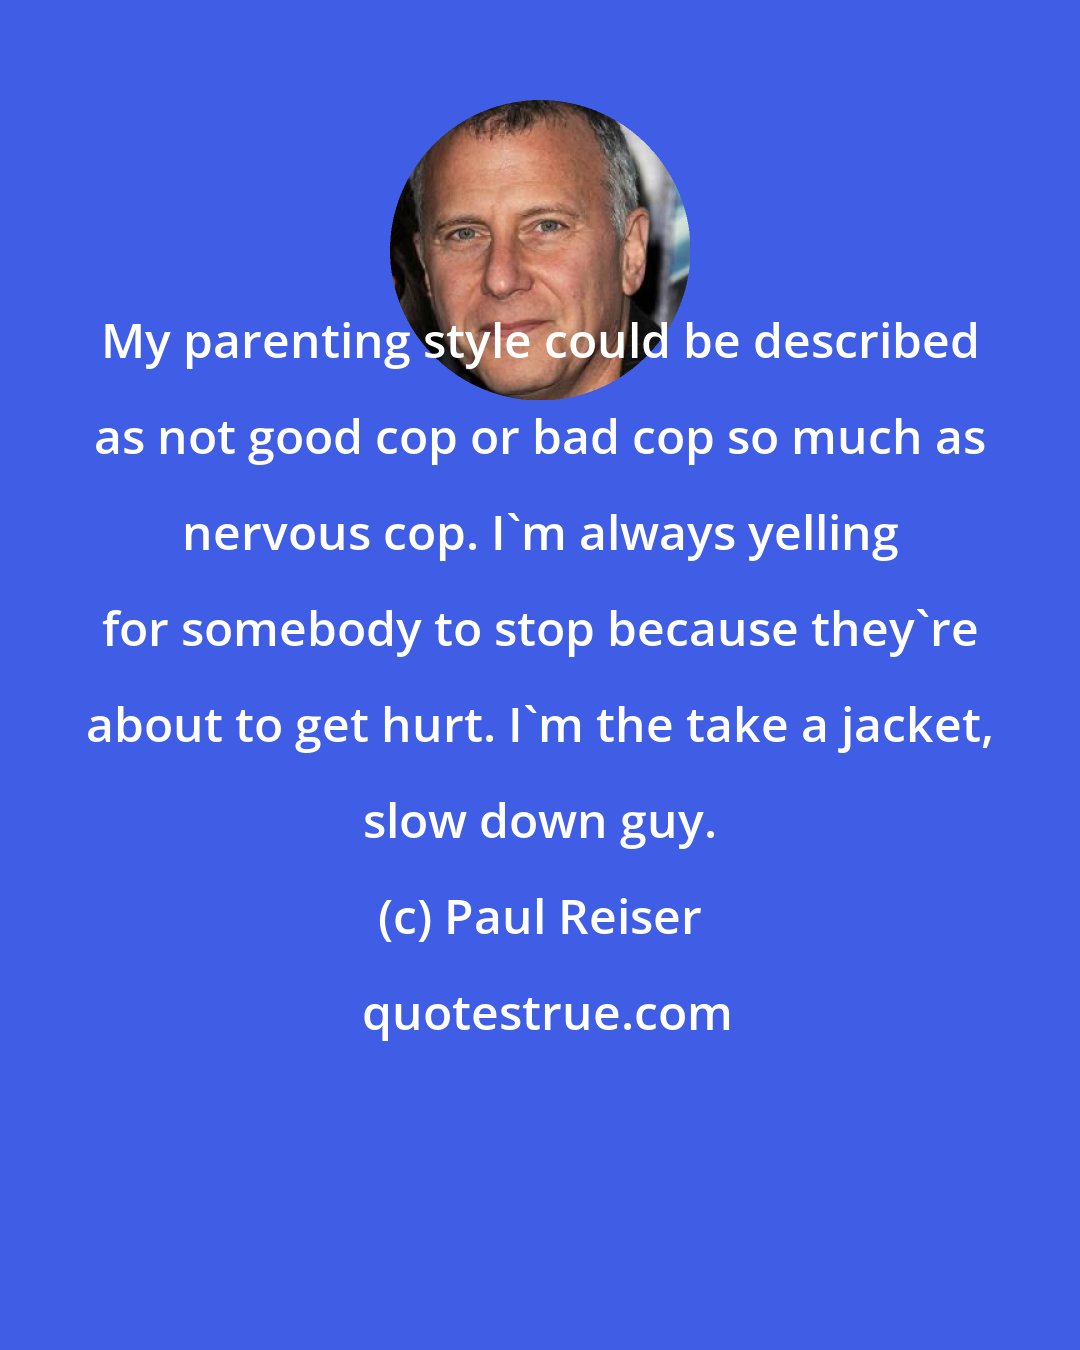 Paul Reiser: My parenting style could be described as not good cop or bad cop so much as nervous cop. I'm always yelling for somebody to stop because they're about to get hurt. I'm the take a jacket, slow down guy.